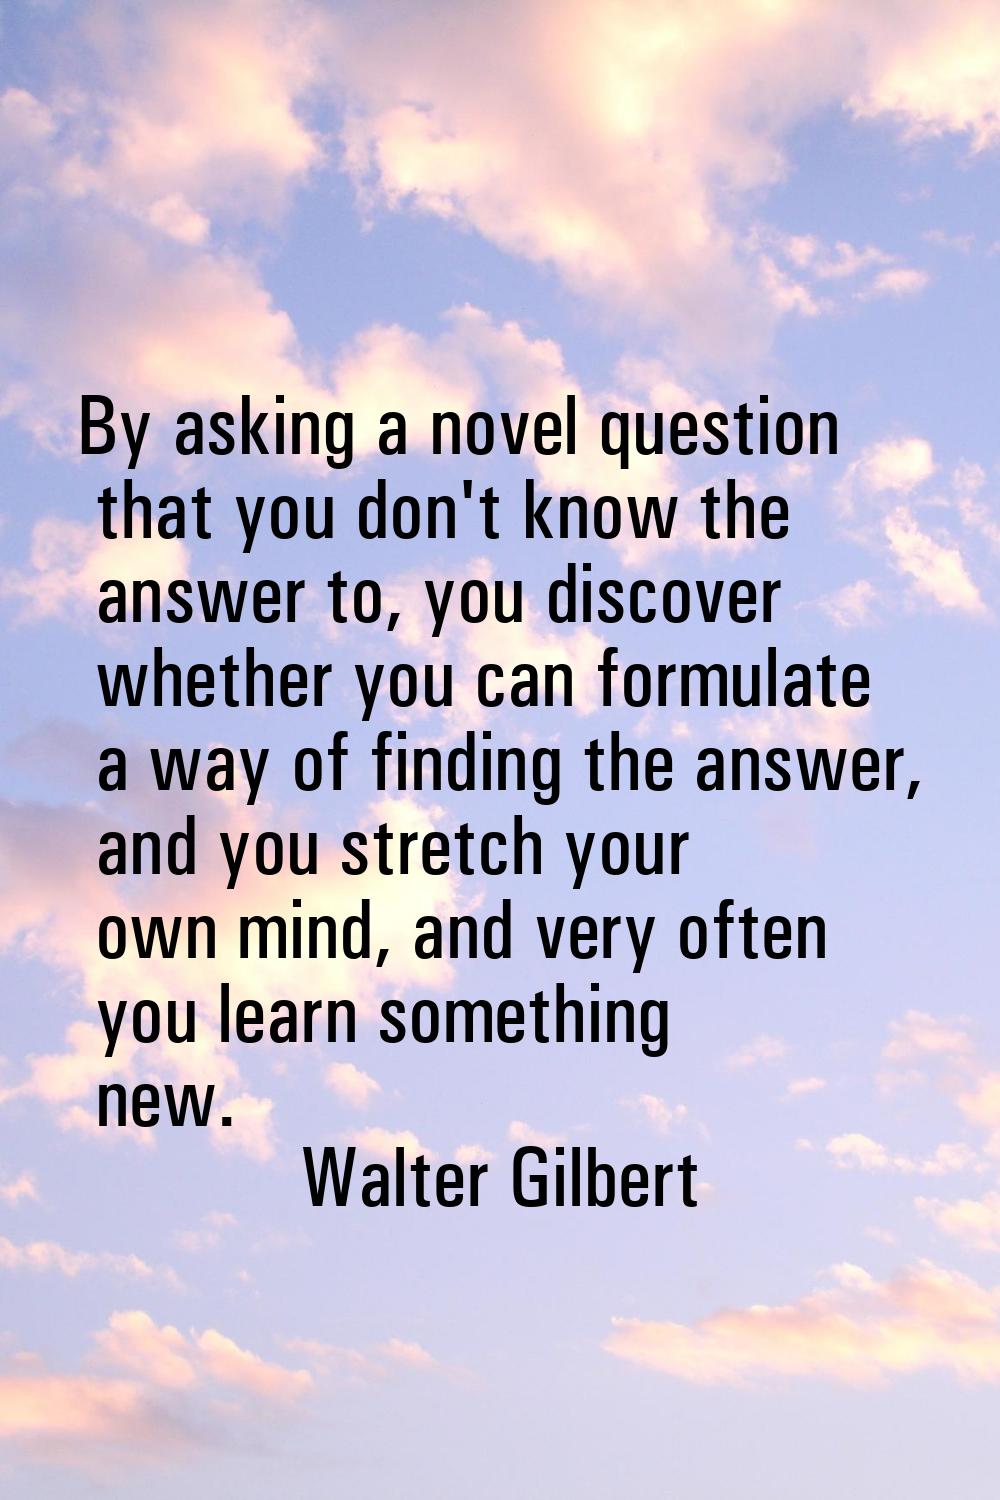 By asking a novel question that you don't know the answer to, you discover whether you can formulat